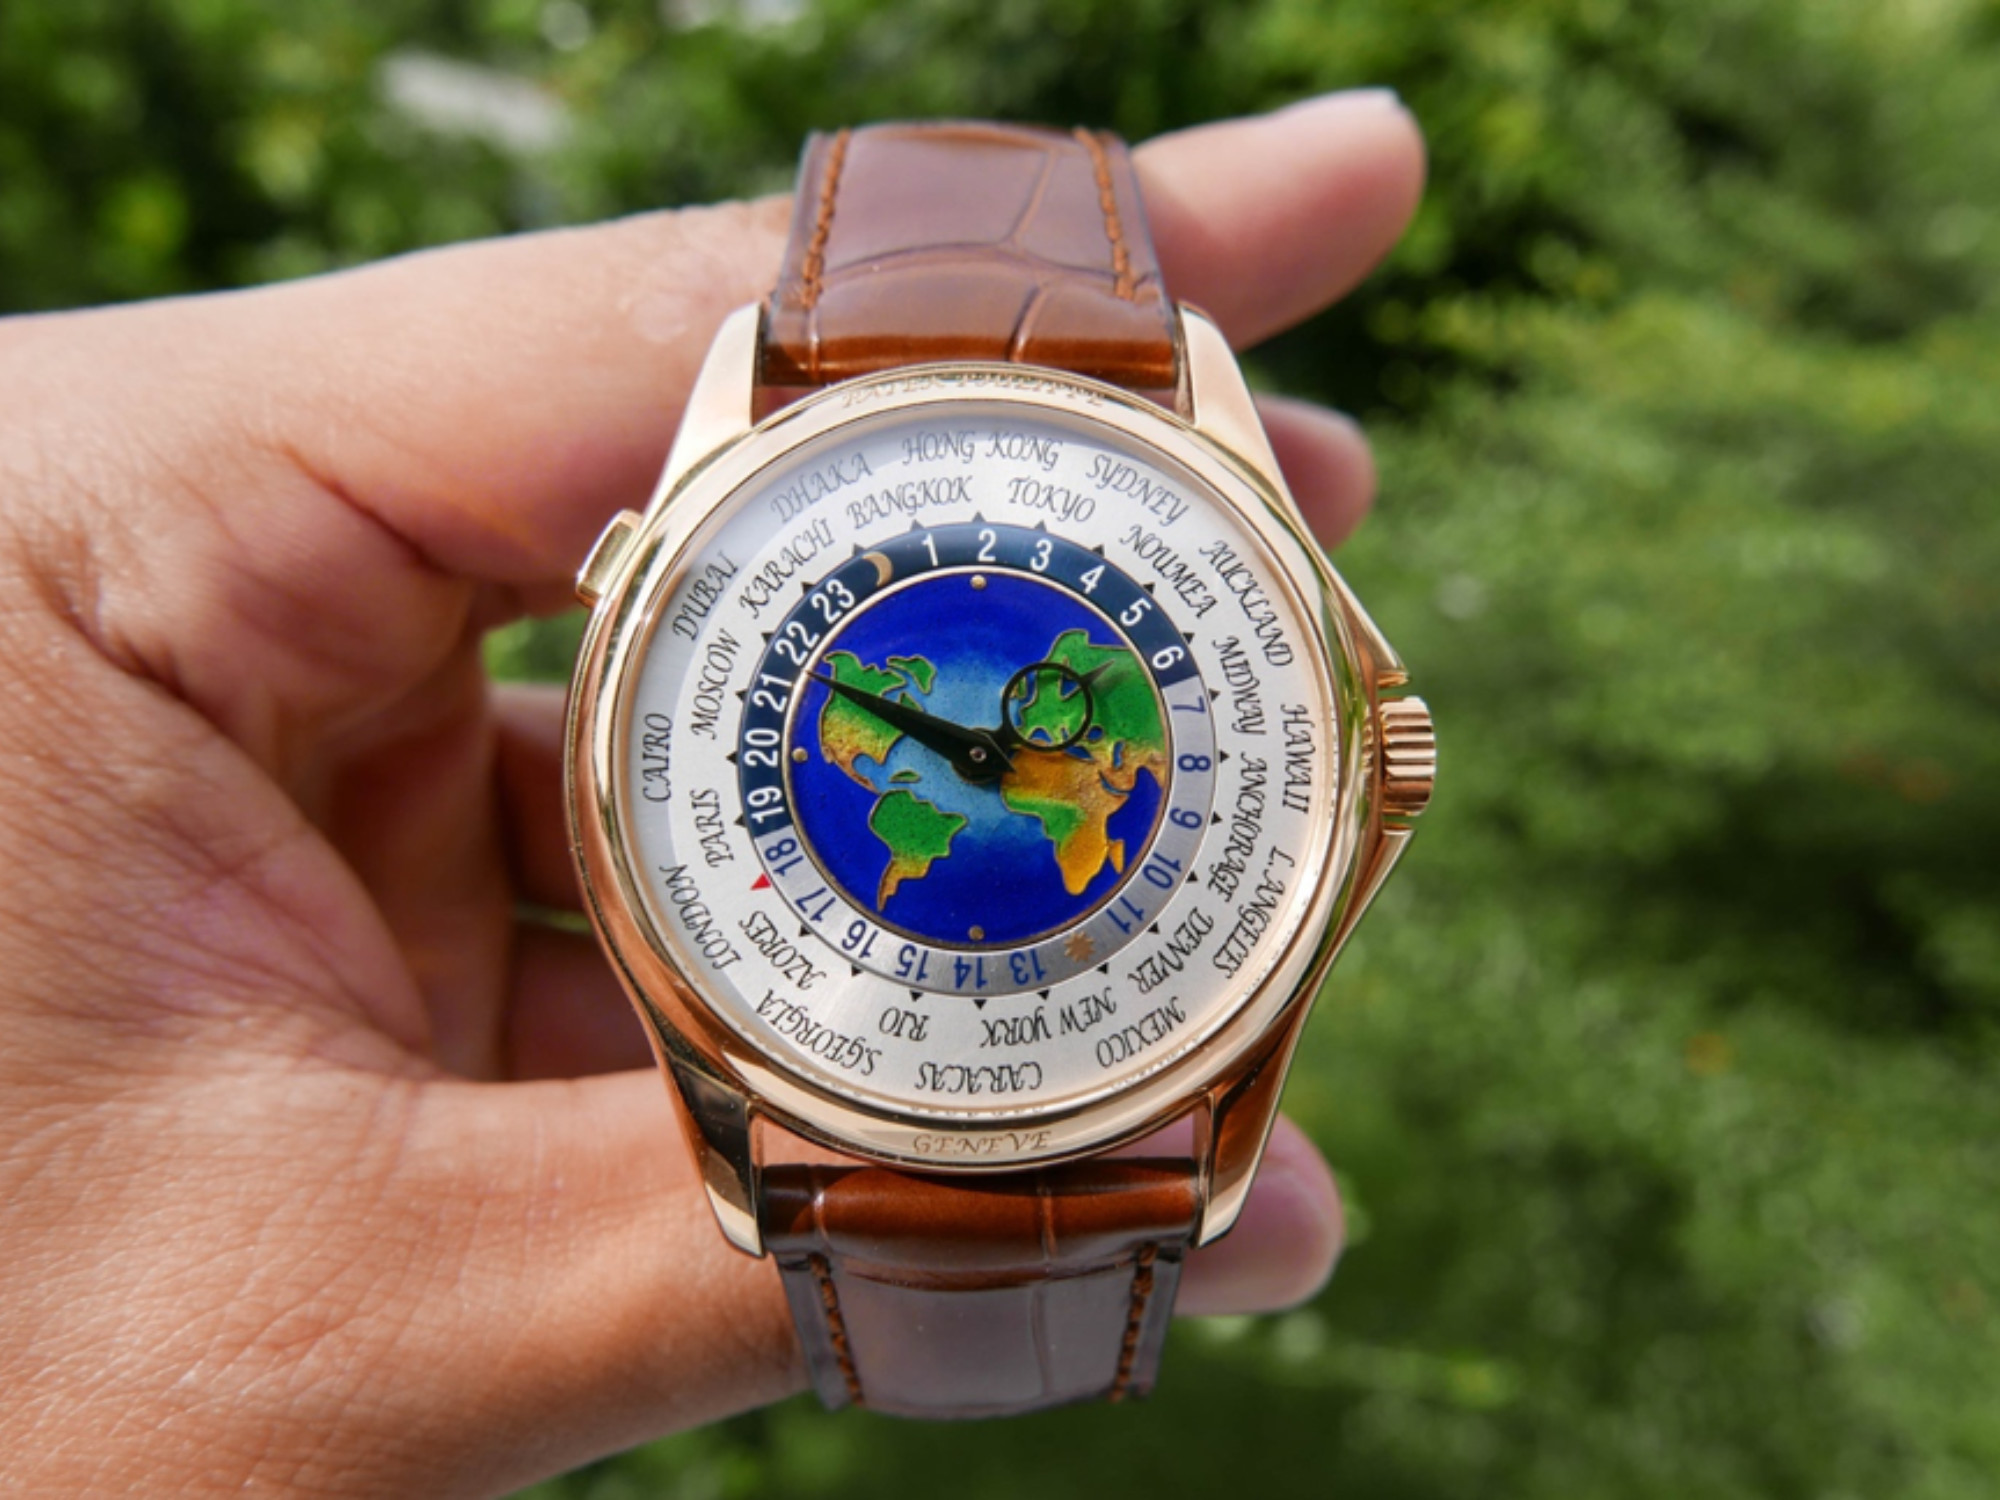 Hands on the World – Patek Philippe World Timers - PMT The Hour